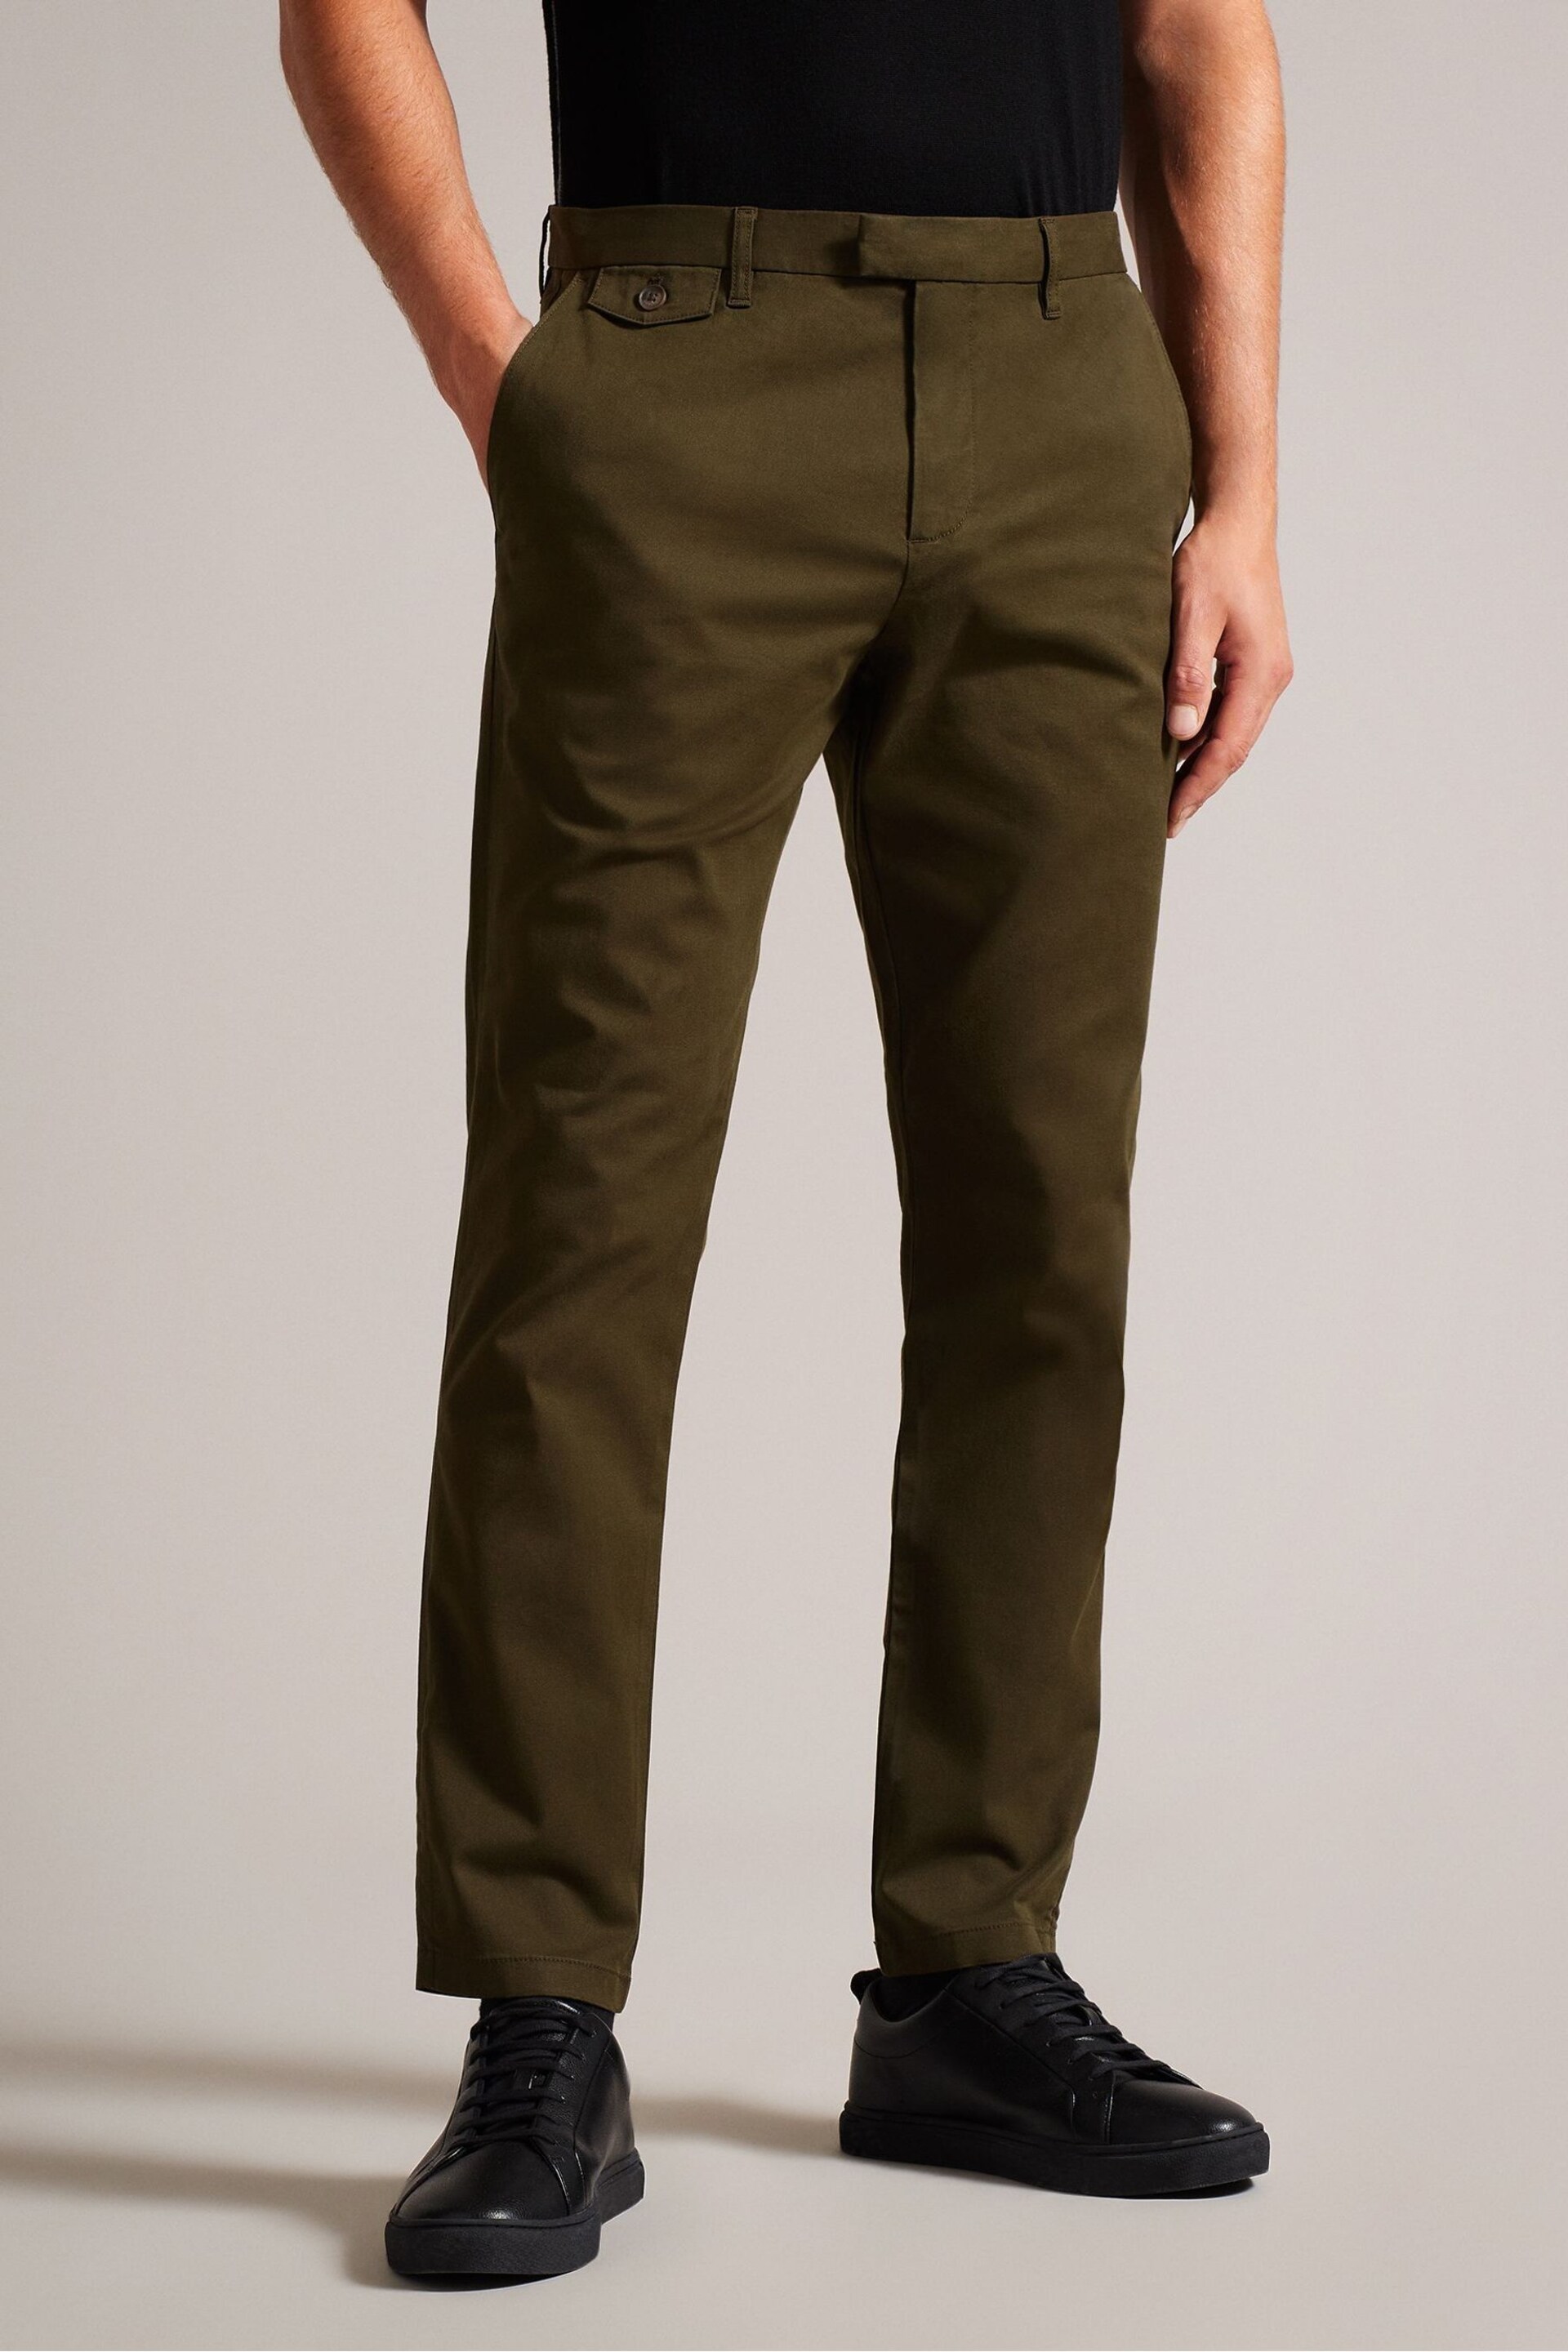 Ted Baker Green Slim Fit Textured Chino Trousers - Image 1 of 5